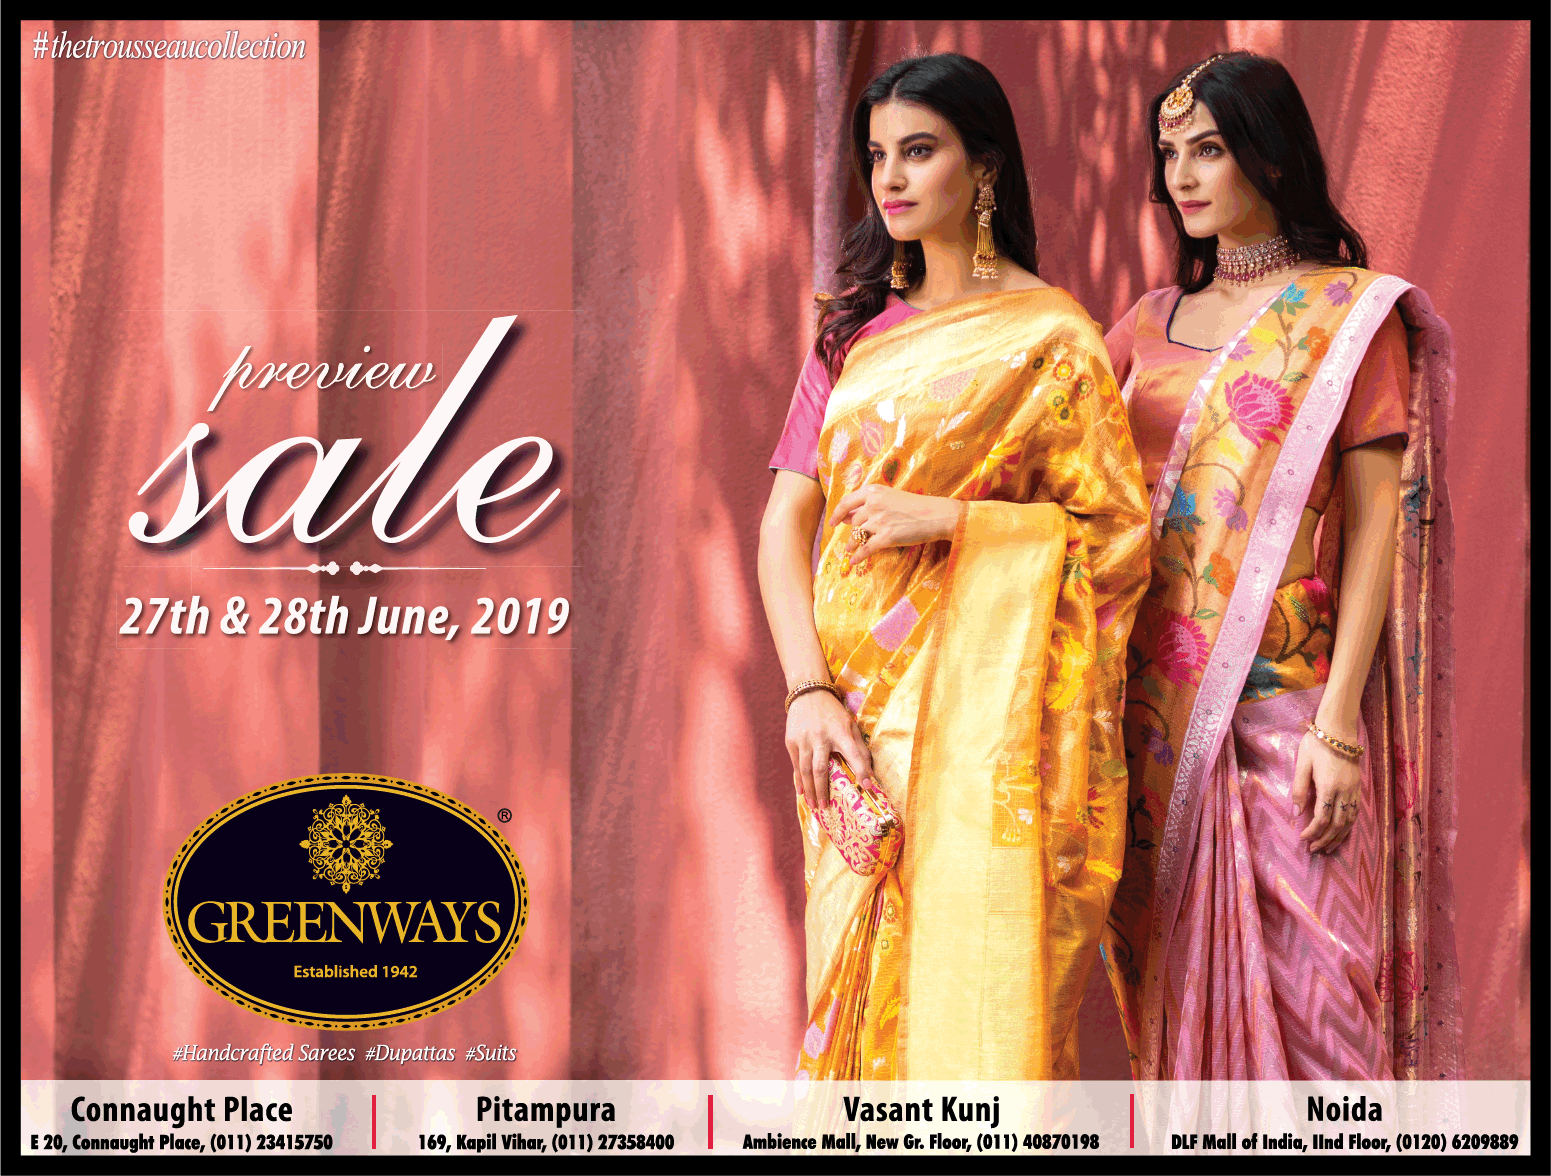 grreenways-sarees-preview-sale-27th-and-28th-june-ad-delhi-times-27-06-2019.png